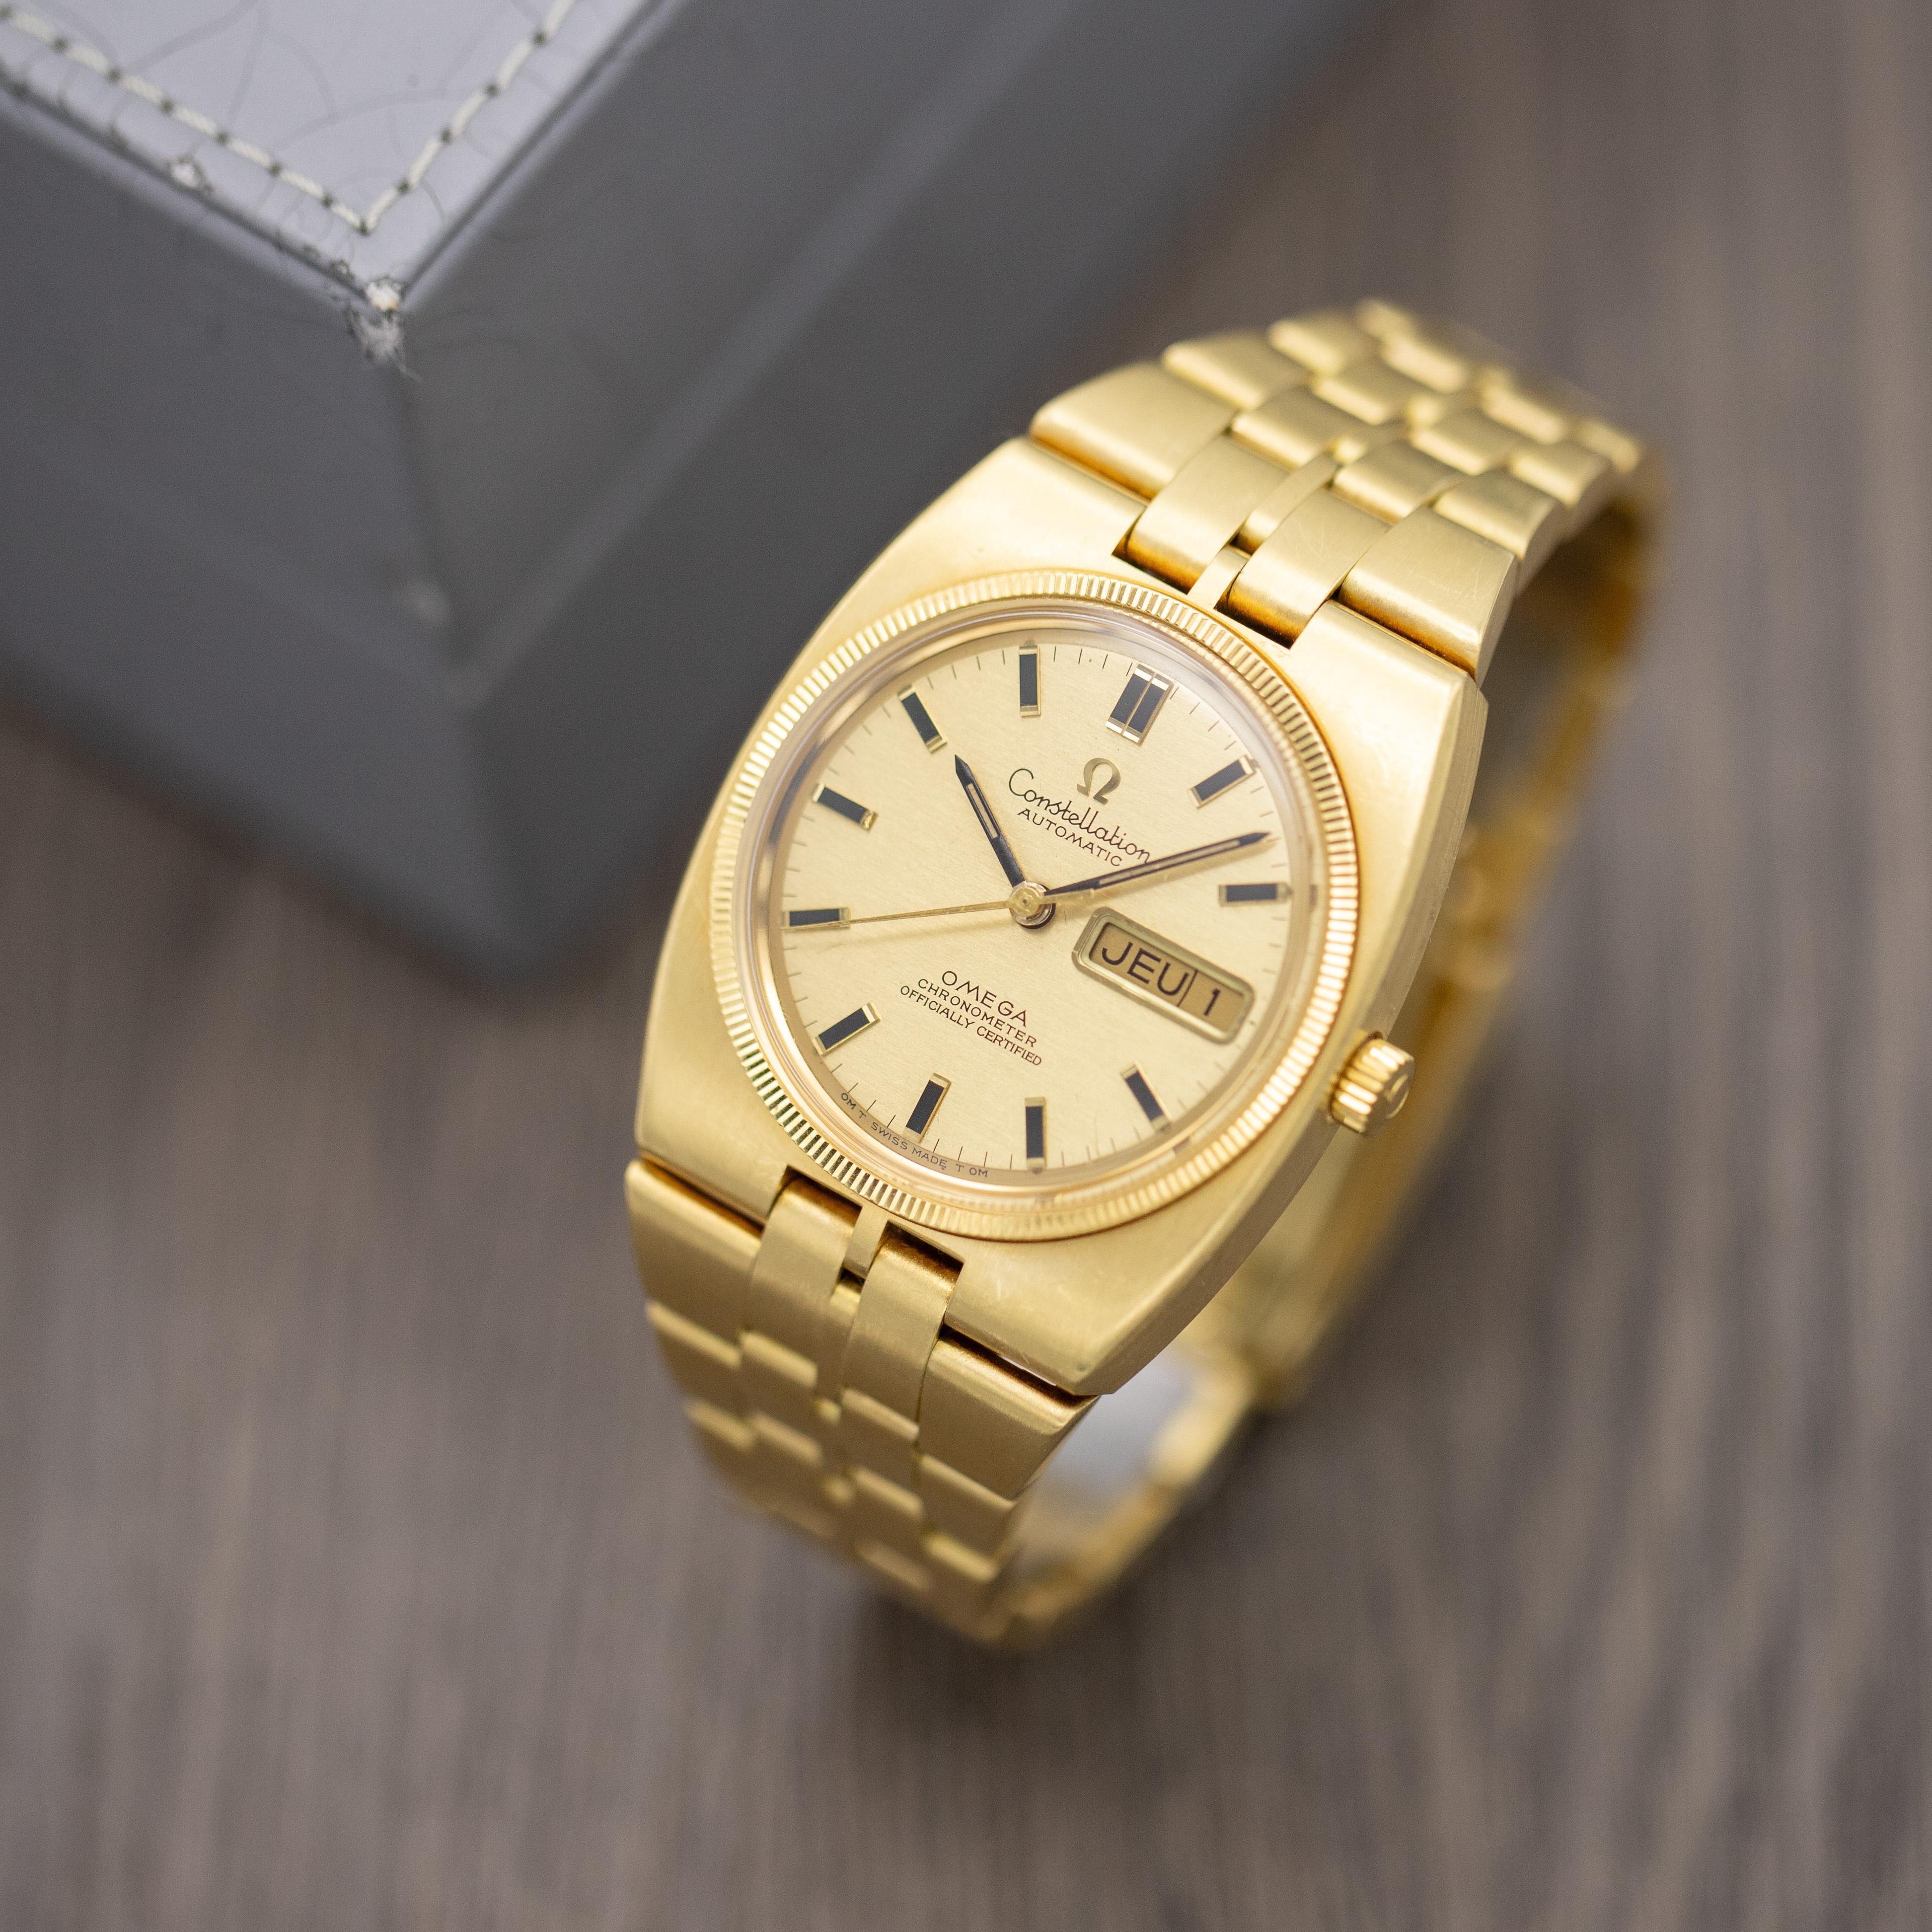 Modern Omega Constellation Automatic Chronometer Day-Date - Vintage 18k Men's Watch For Sale